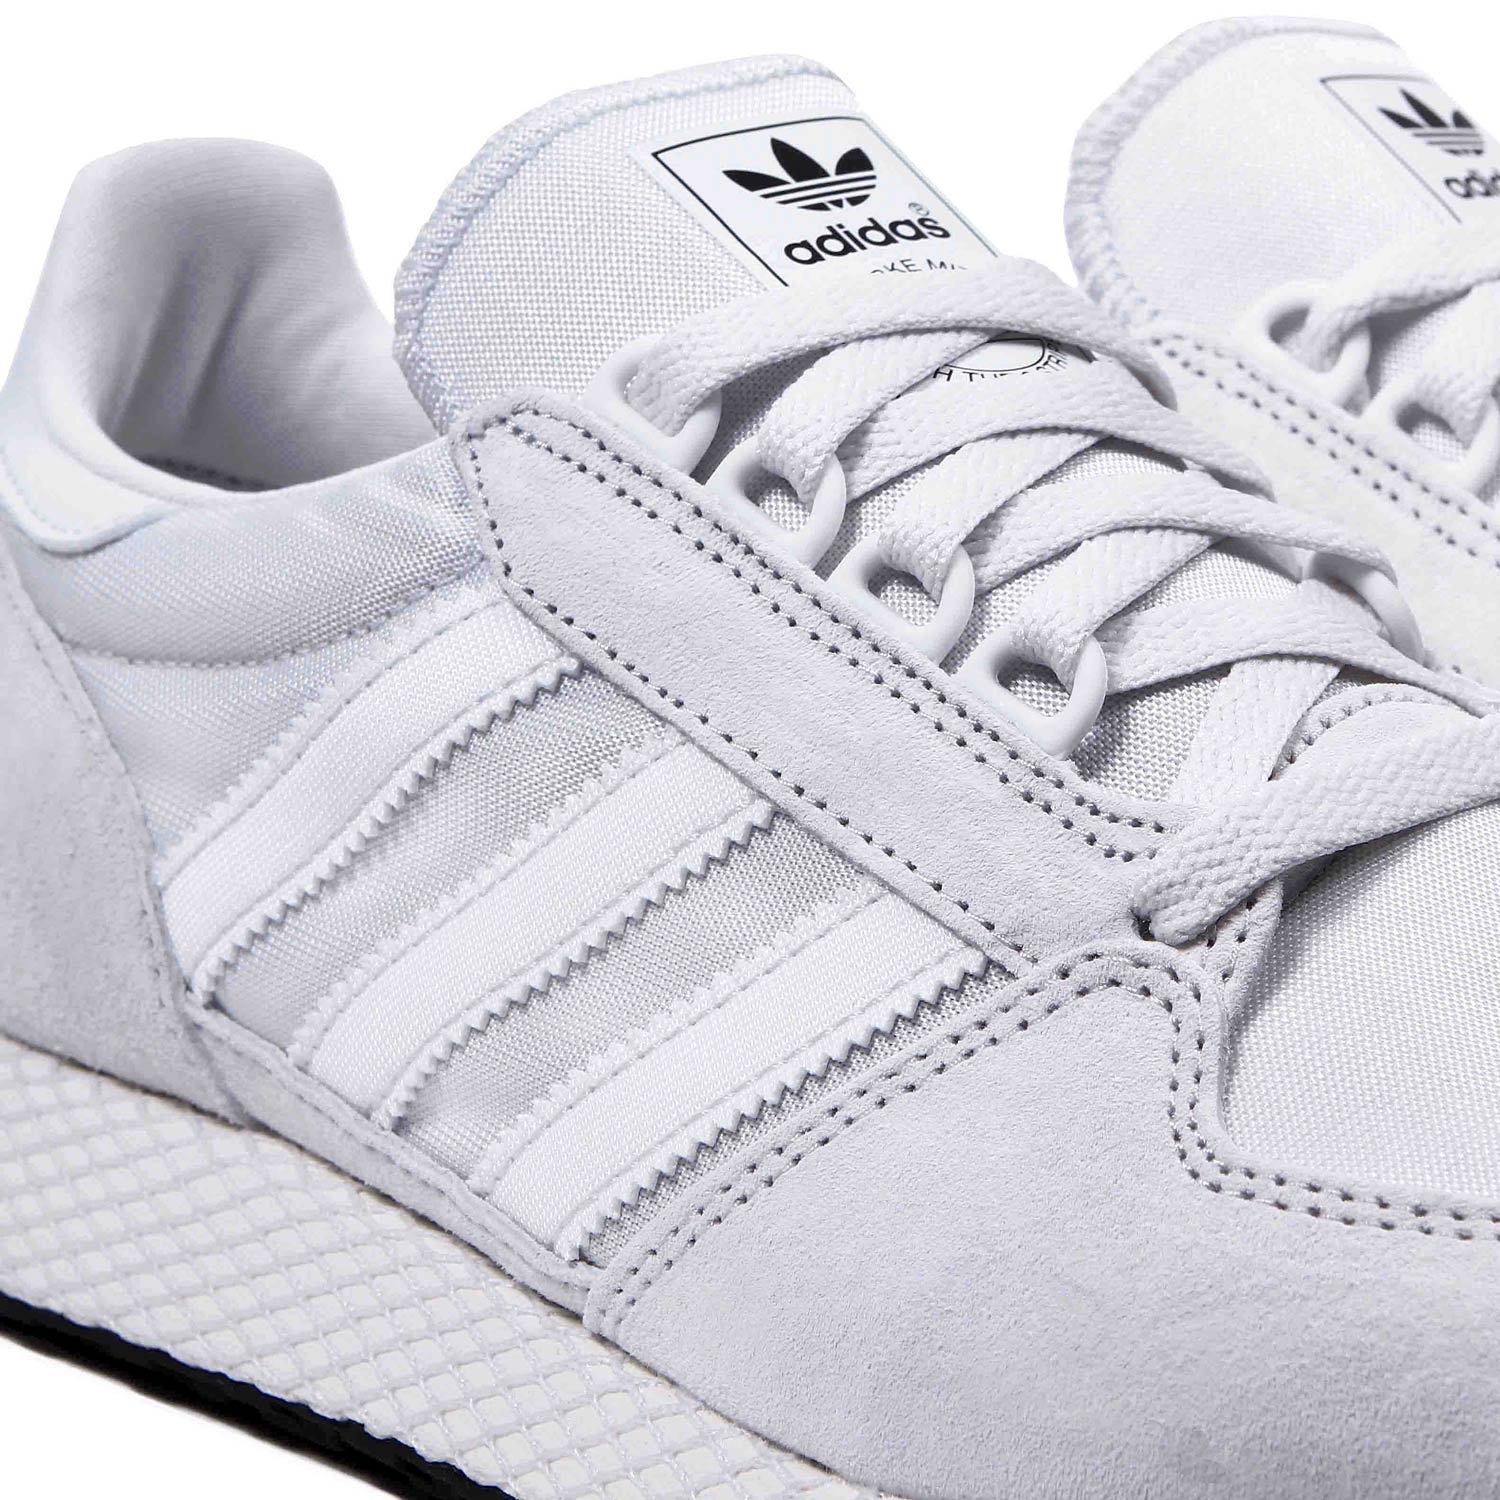 Adidas ORIGINALS FOREST GROVE crystal white / crystal white / core black